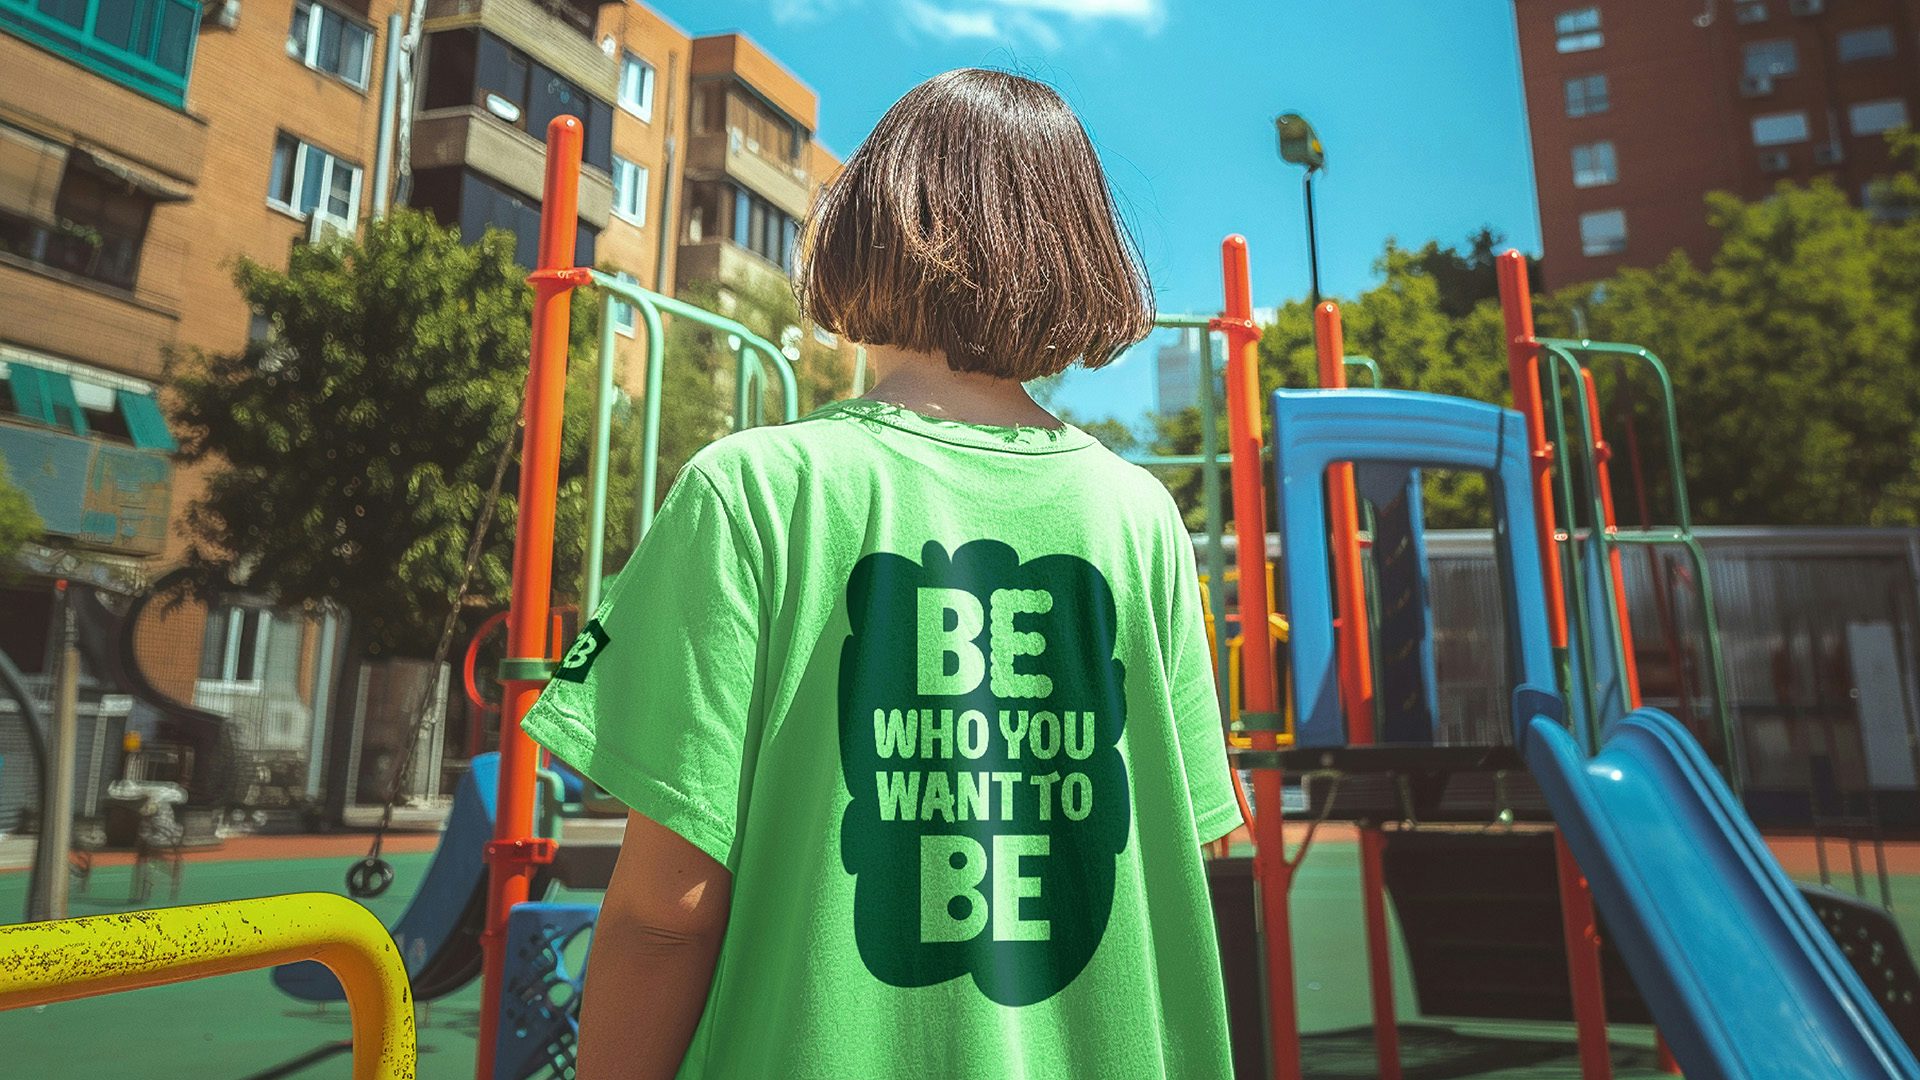 Image shows the new Barnardo's visual identity as seen on a graphic that reads 'be who you want to be' on the back of a bright green shirt worn by a young person